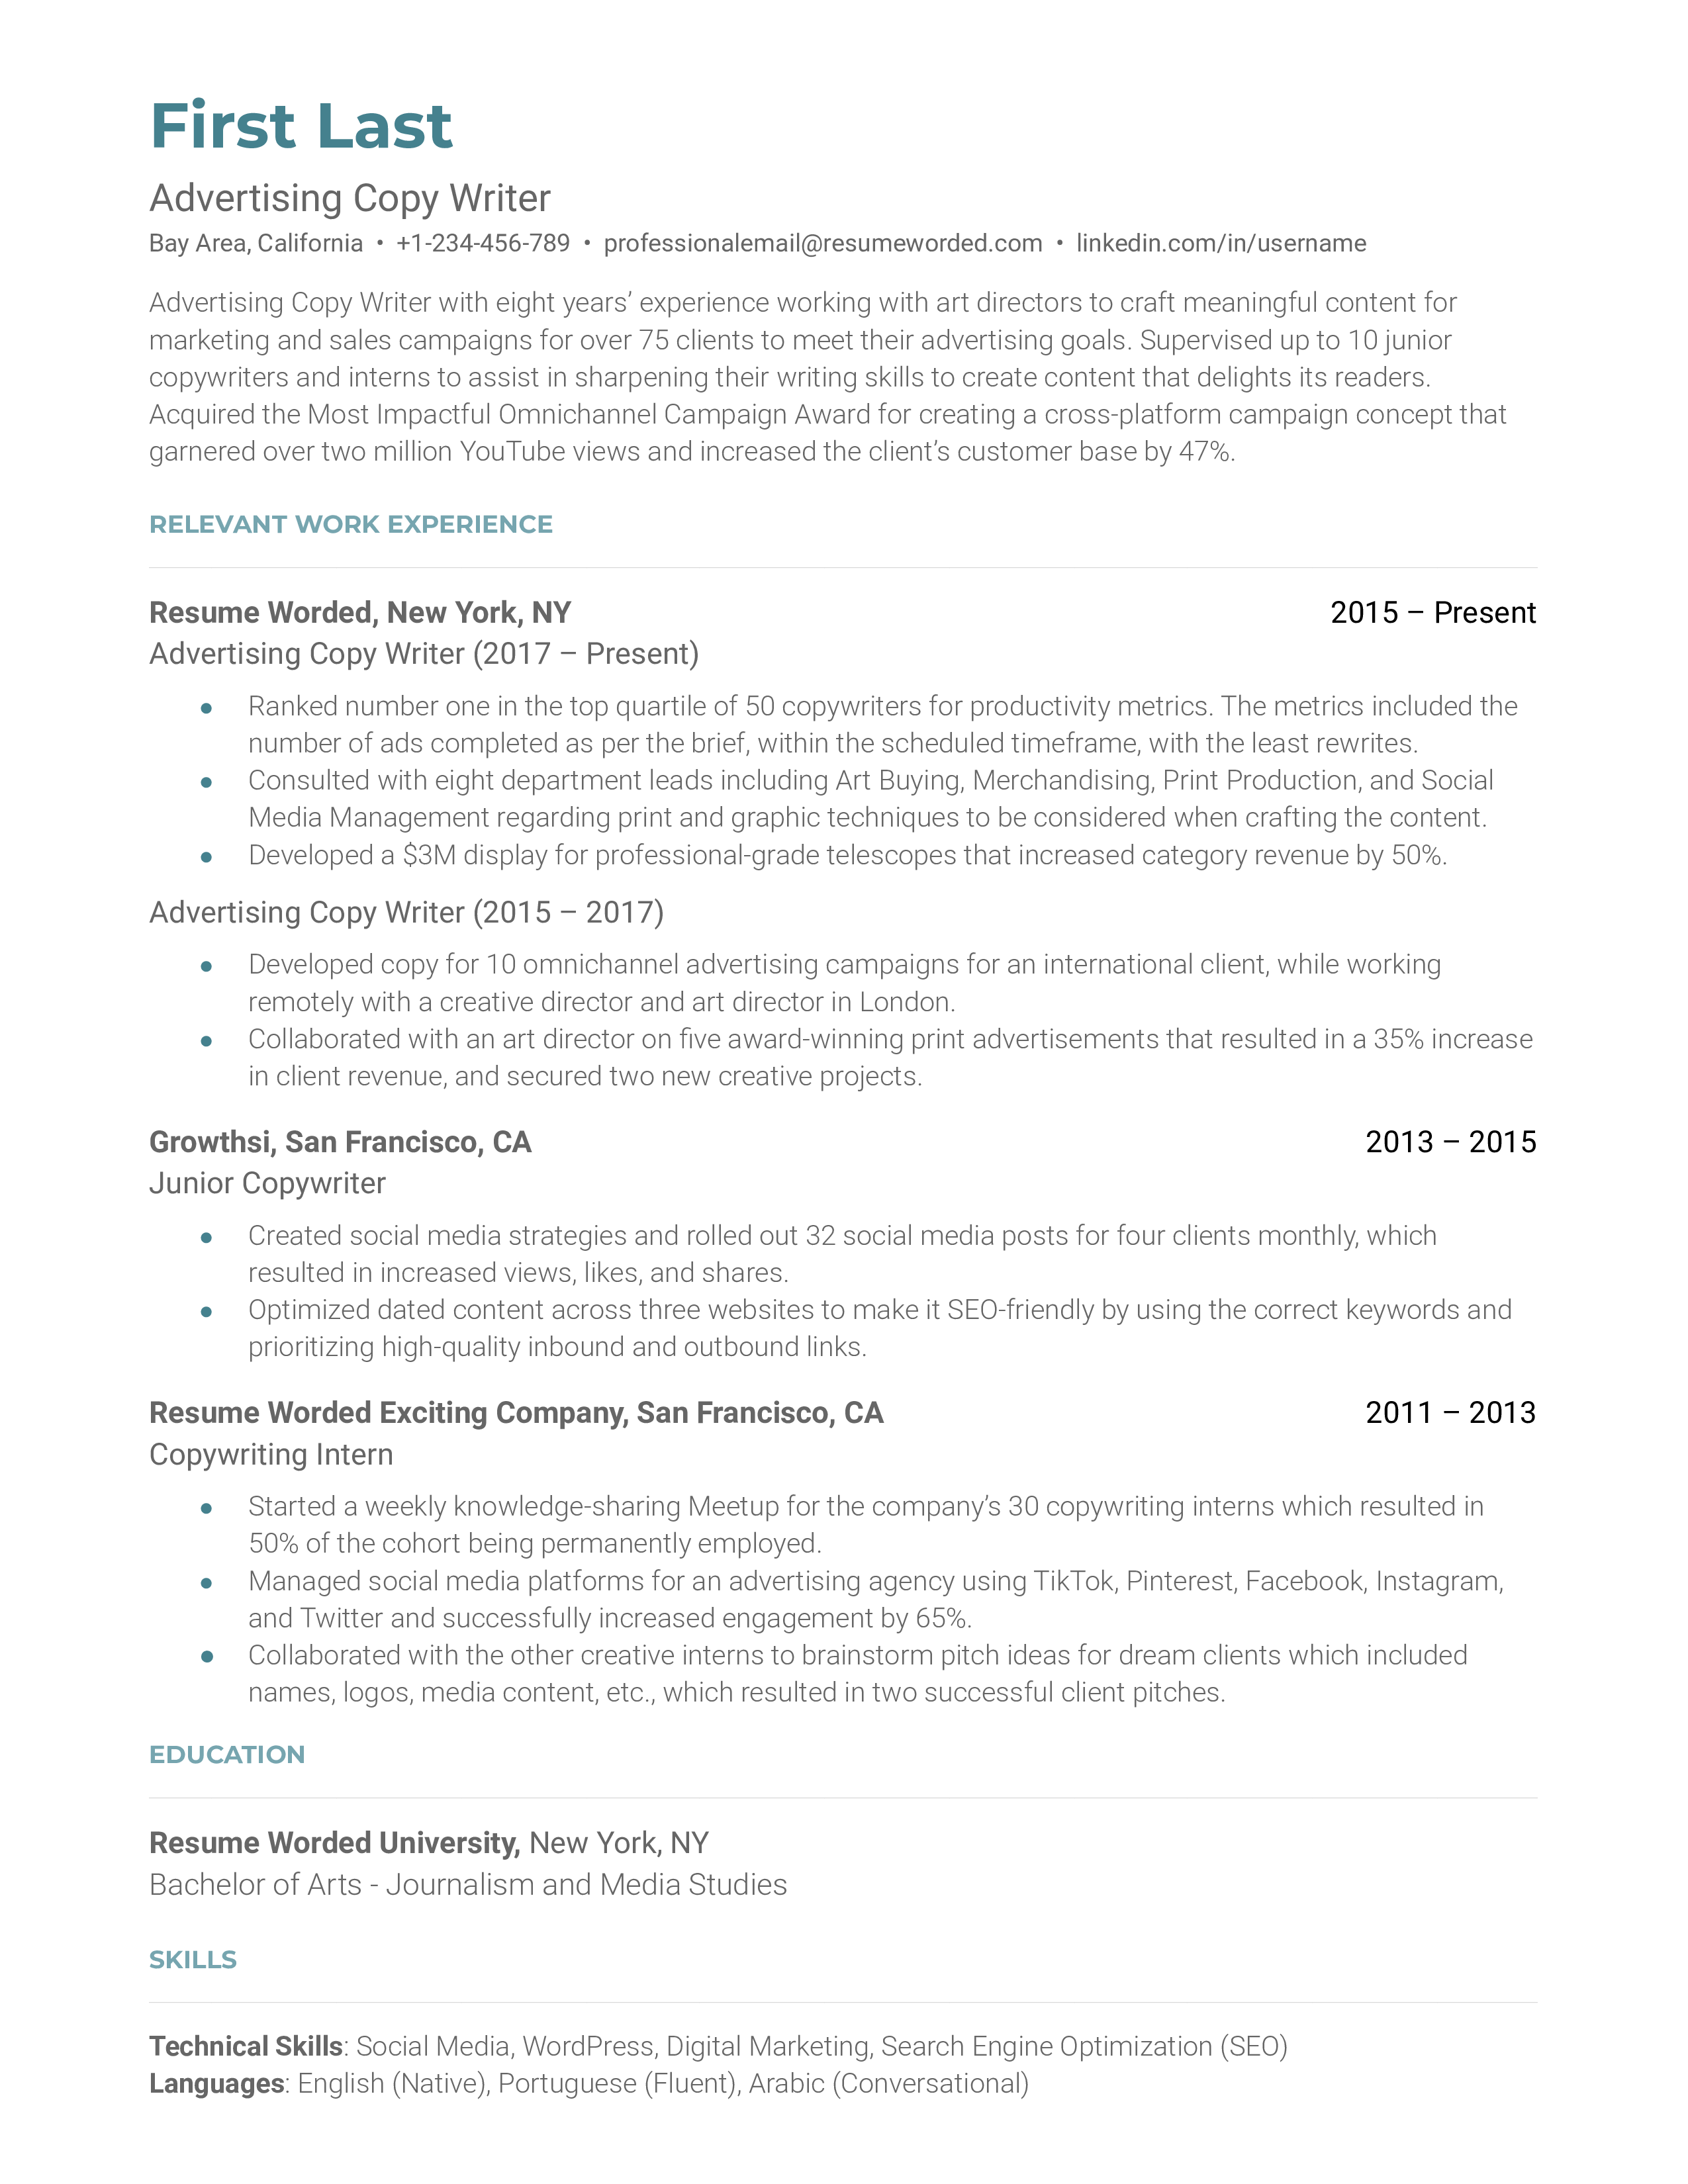 Advertising copywriter resume sample with highlights applicant's recognized work and expertise in marketing.